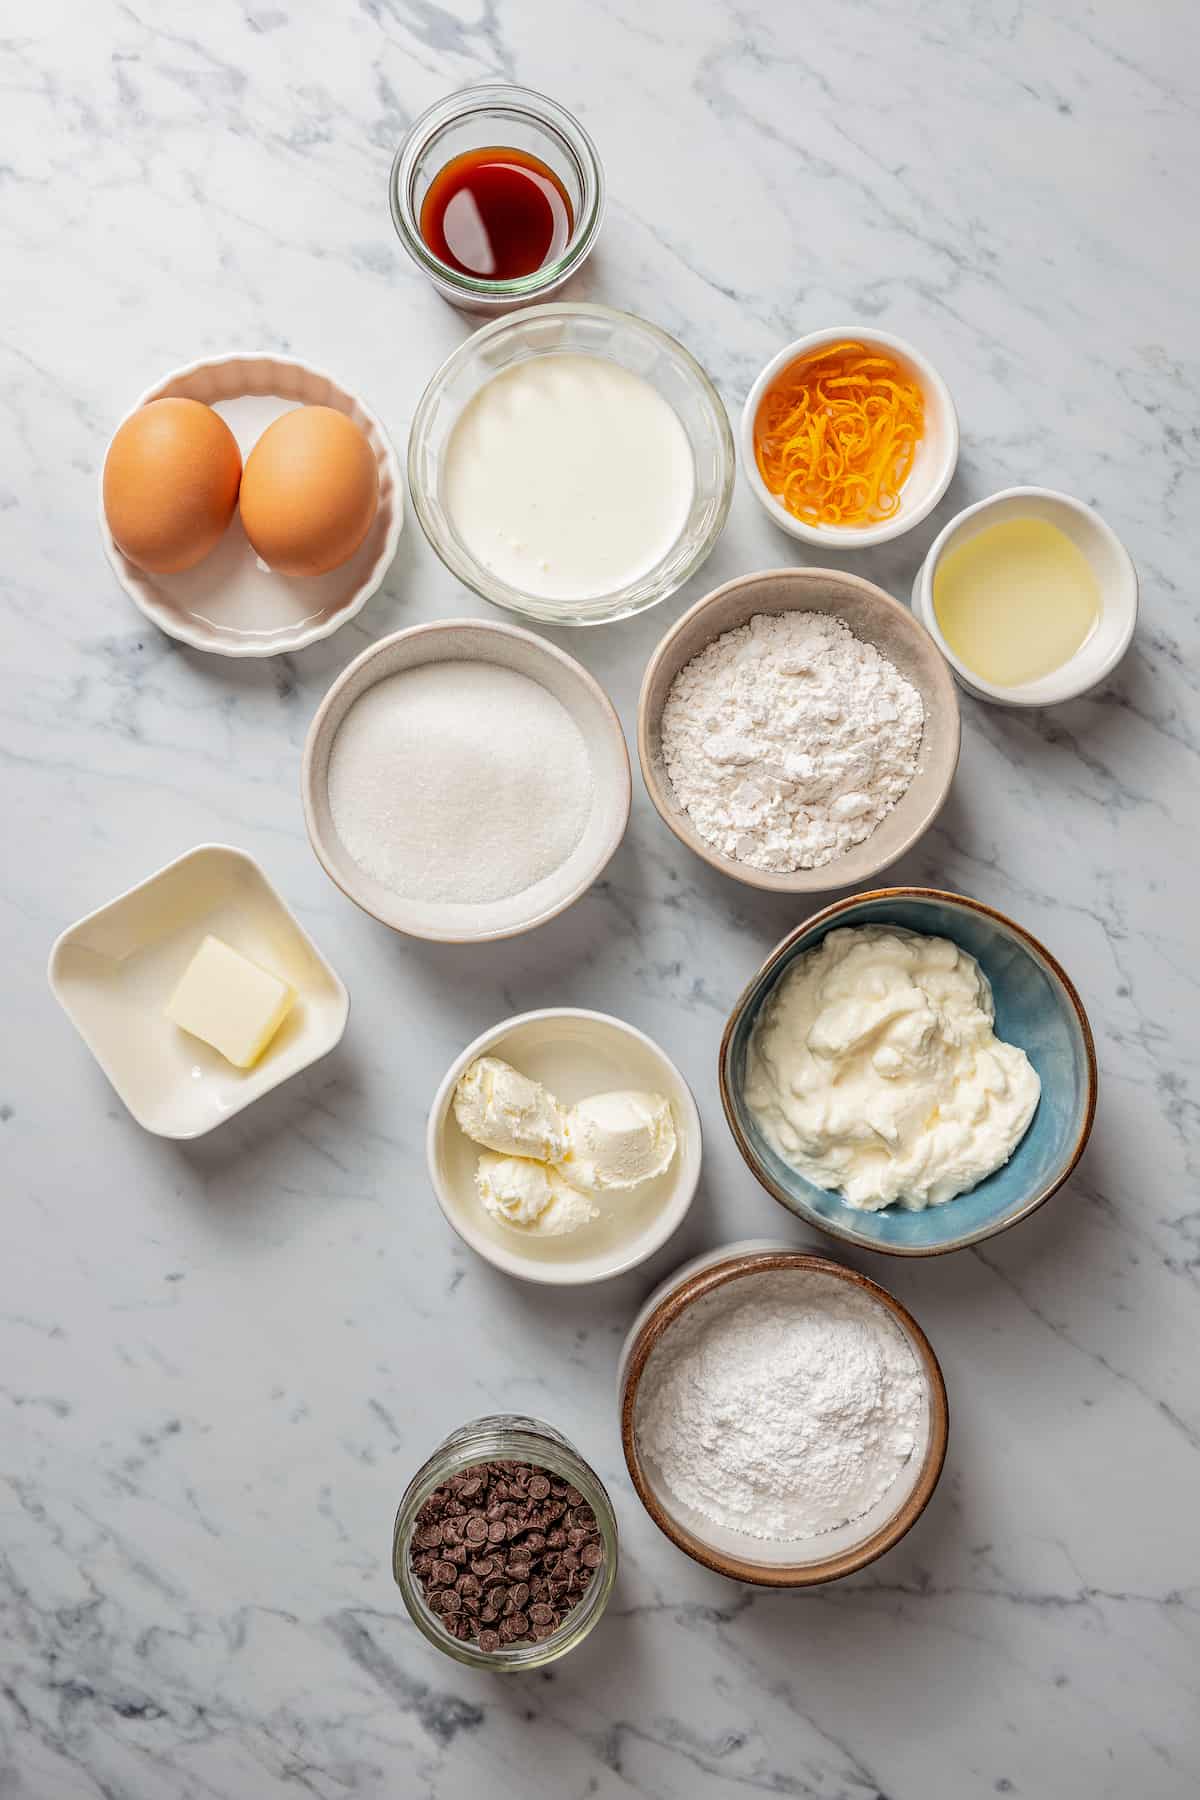 Overhead view of the ingredients needed to make cannolis: a bowl of vanilla extract, a bowl of orange zest, a bowl of eggs, a bowl of heavy cream, a bowl of sugar, a bowl of powdered sugar, a bowl of ricotta, a bowl of cream cheese, a bowl of butter, a bowl of flour, and a bowl of chocolate chips